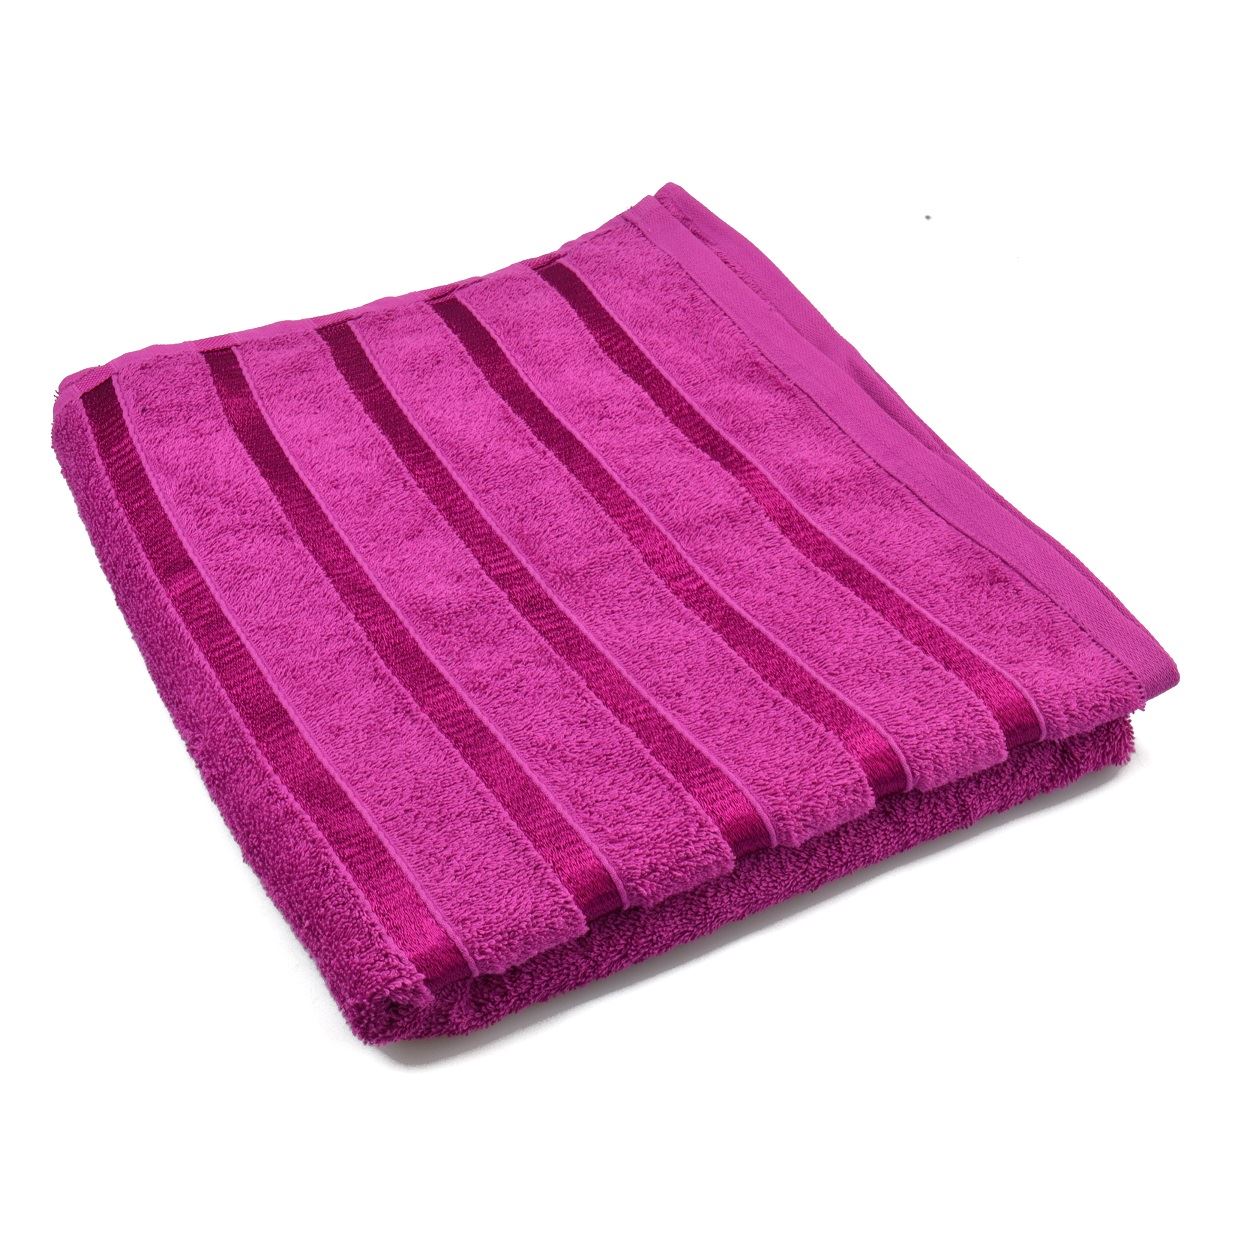 Dry Off in Style with an Egyptian Stripe Bath Sheet